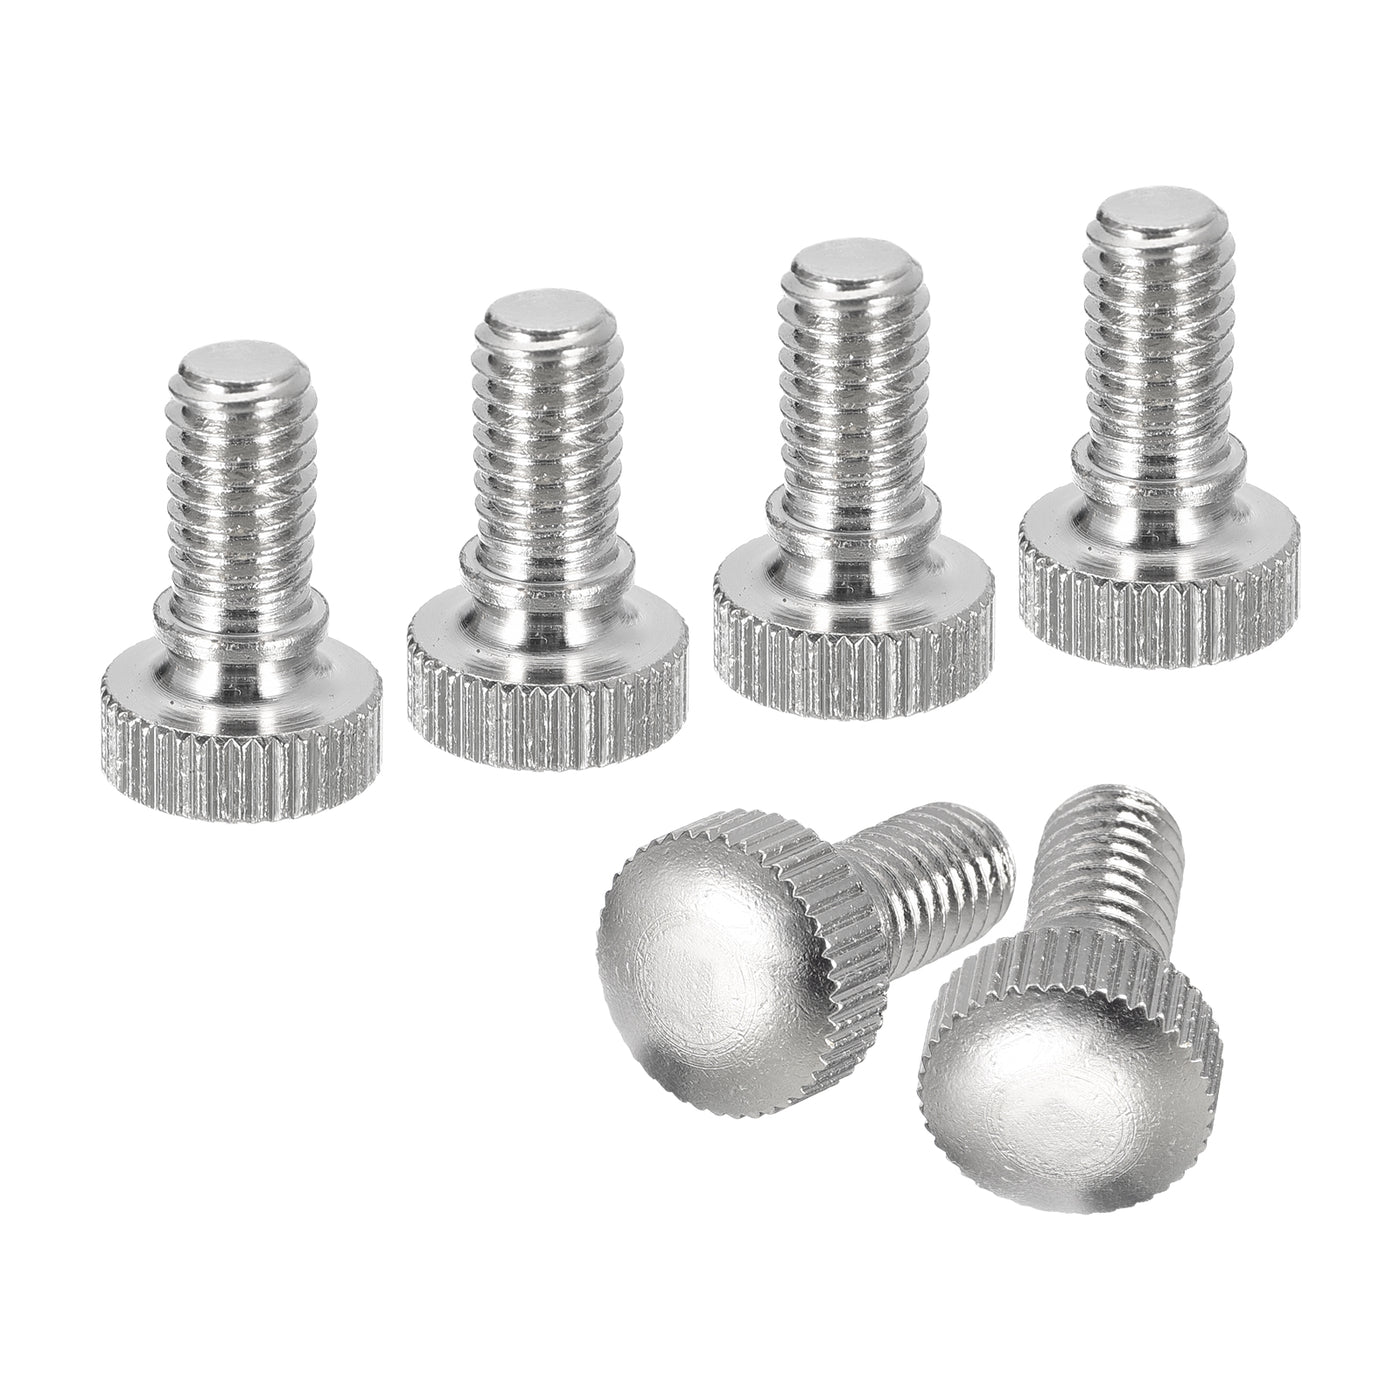 uxcell Uxcell M6x10mm Knurled Thumb Screws, 6pcs Brass Thumb Screws with Shoulder, Silver Tone